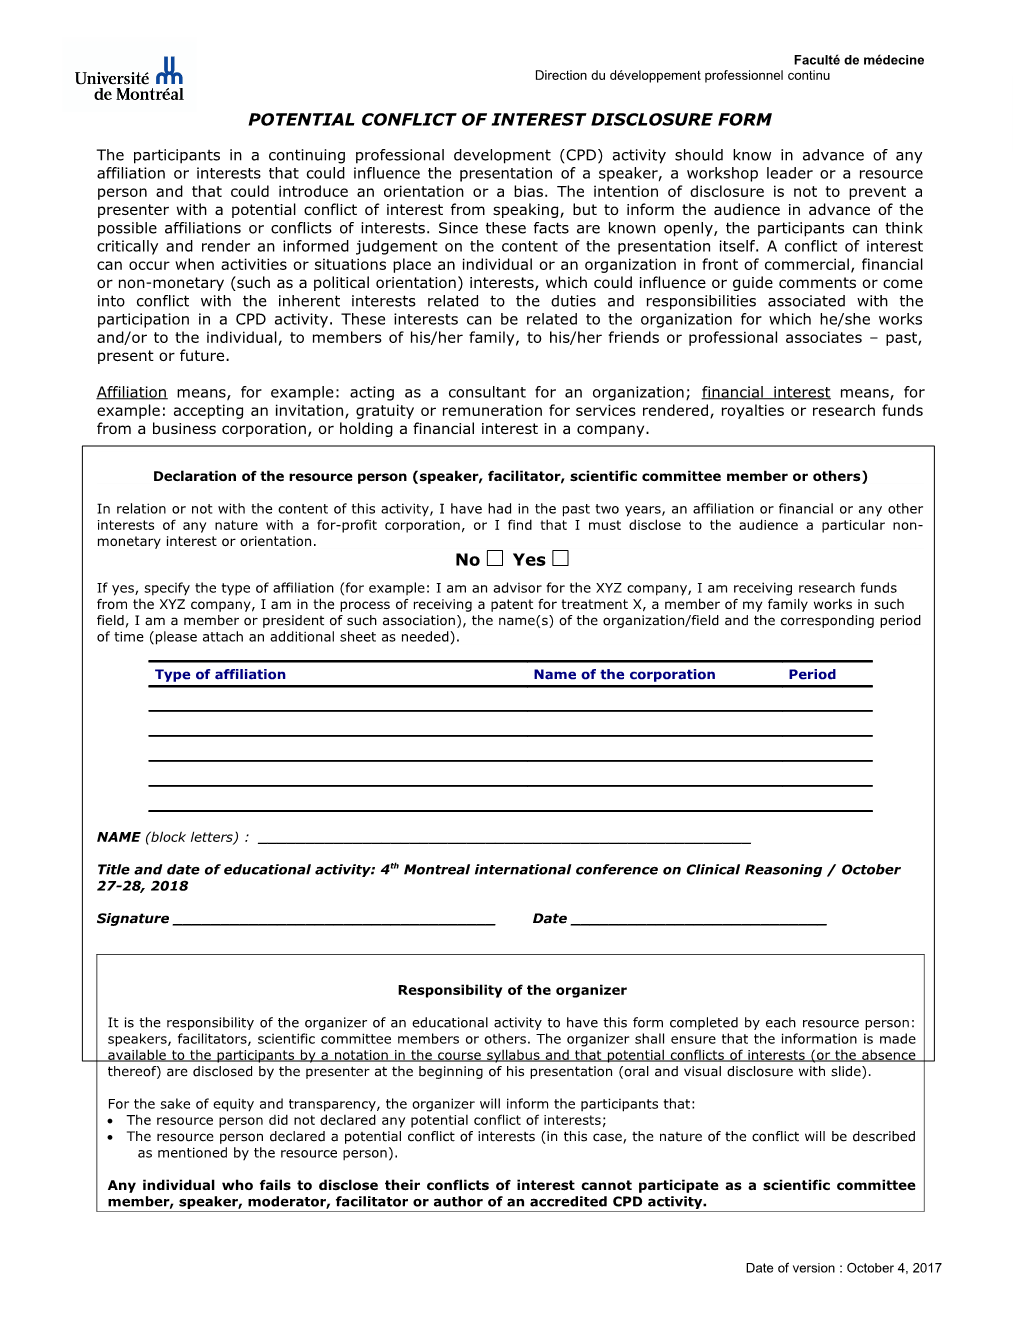 Potential Conflict of Interest Disclosure Form